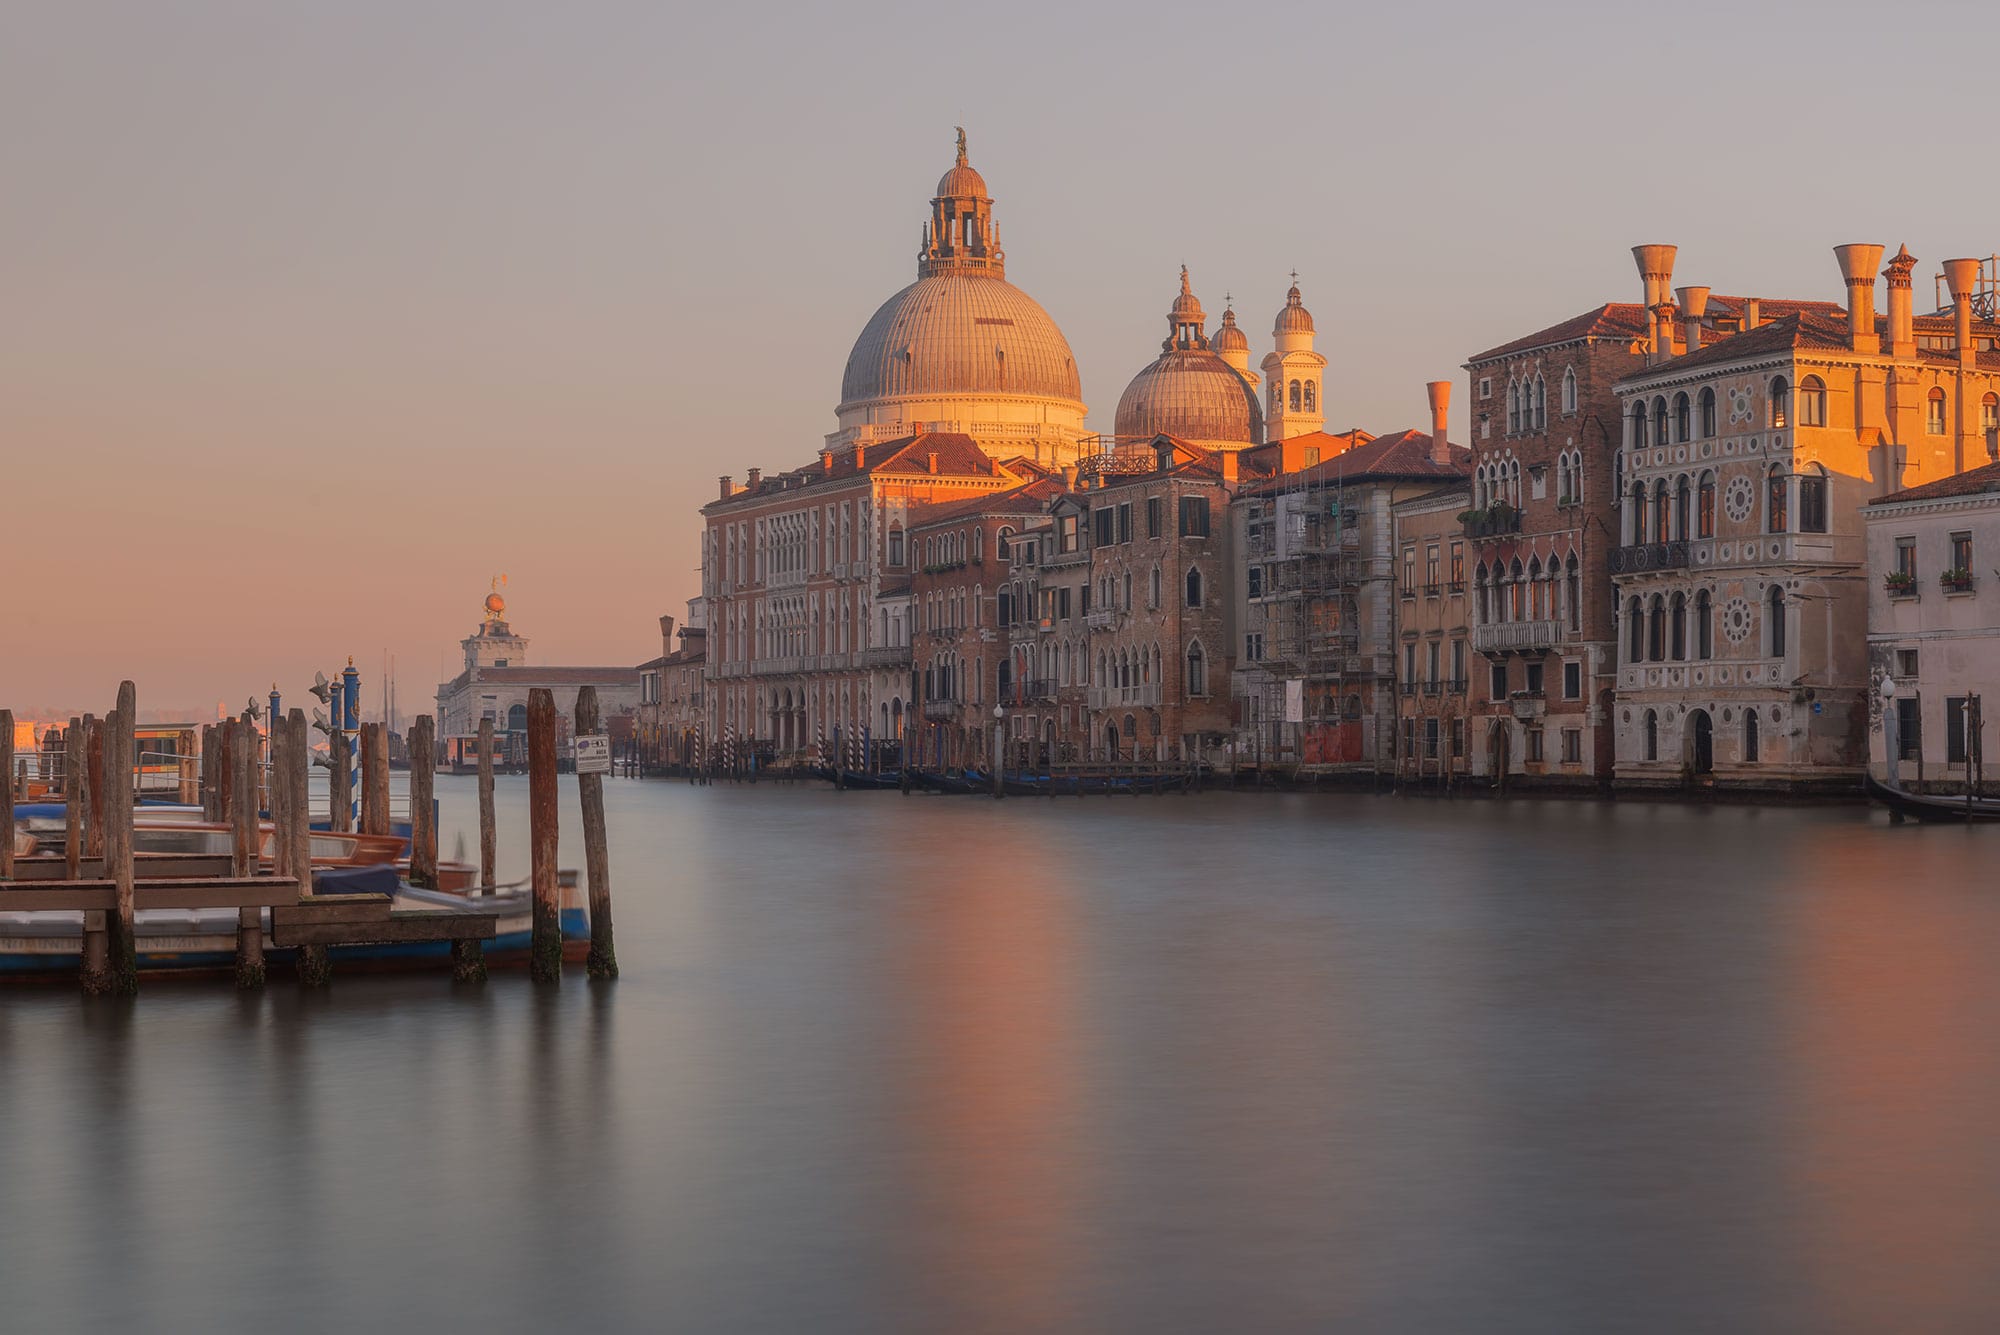 Urban photography capturing a long exposure of the Grand Canal in Venice, Italy, at sunset. The serene scene showcases the canal's smooth waters and the glowing hues of the setting sun.